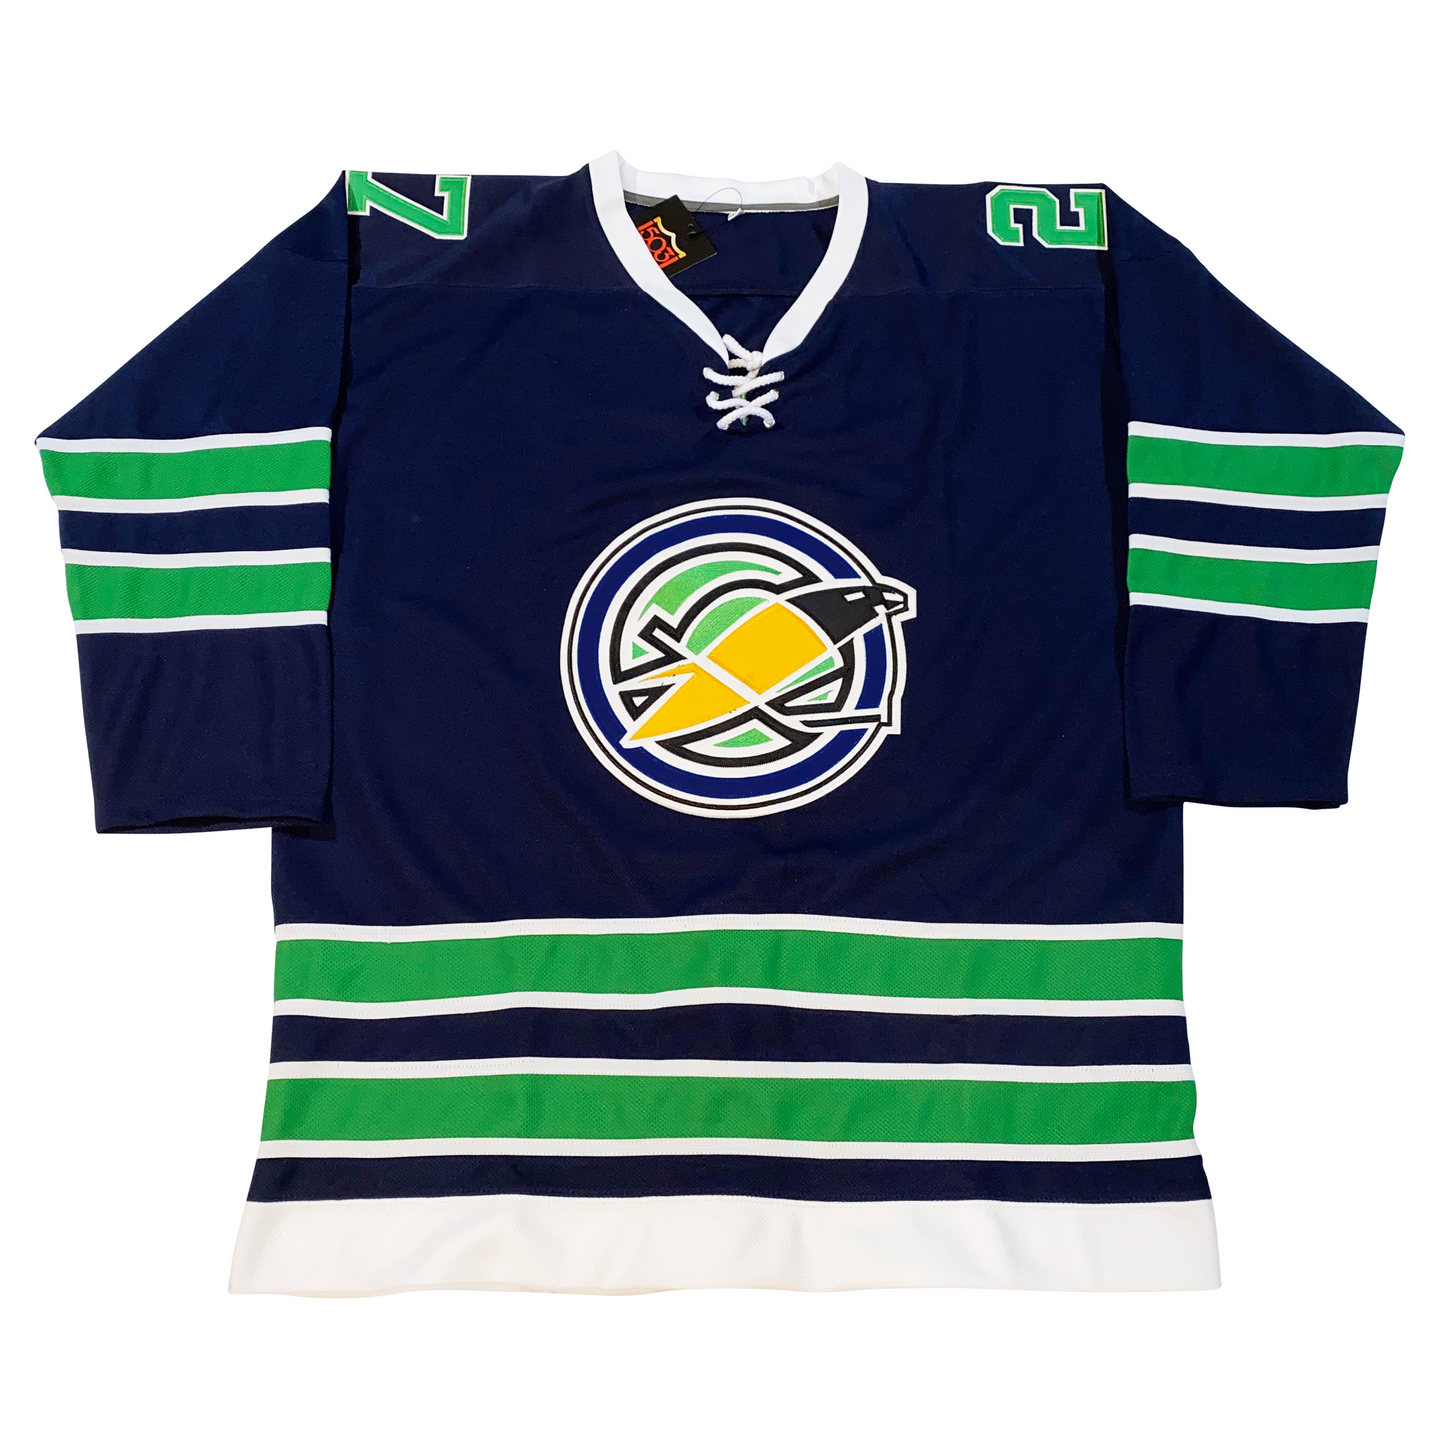 NHL - The short-lived expansion California Seals left a colorful